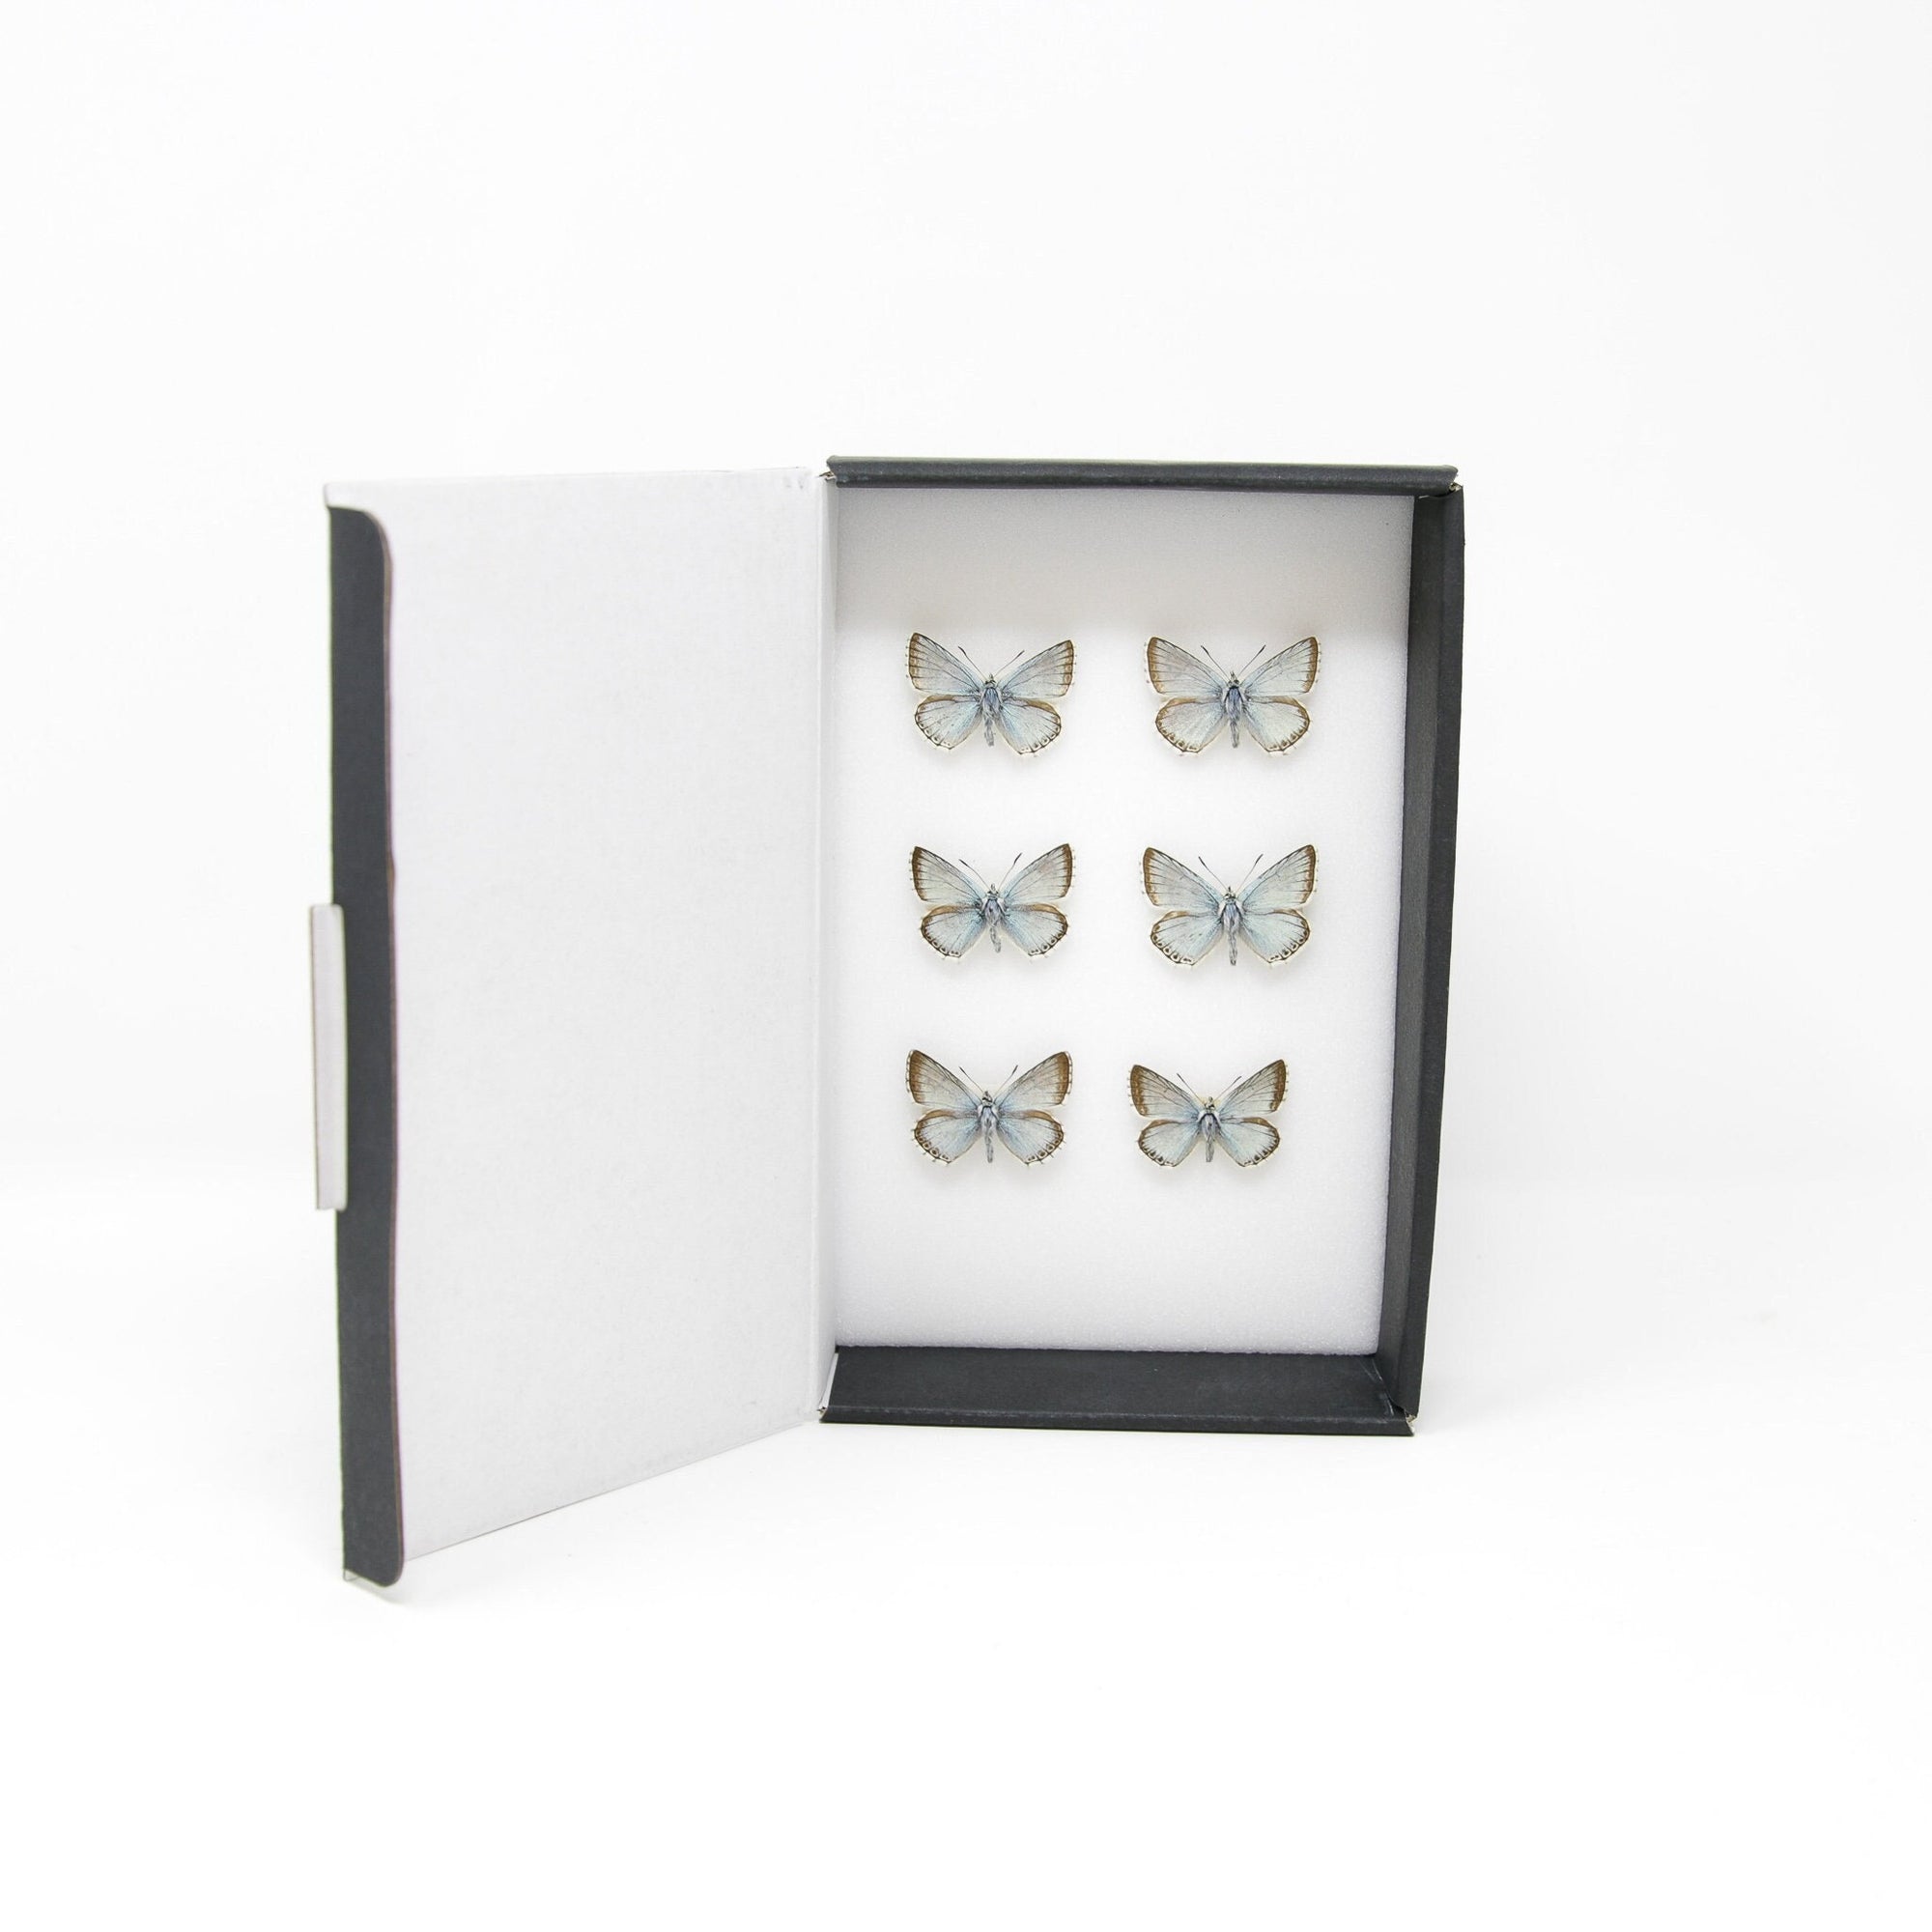 A Collection of Chalkhill Blue Butterflies (Lysandra coridon) with Scientific Collection Data, A1 Quality, Real Lepidoptera Specimens #SE01